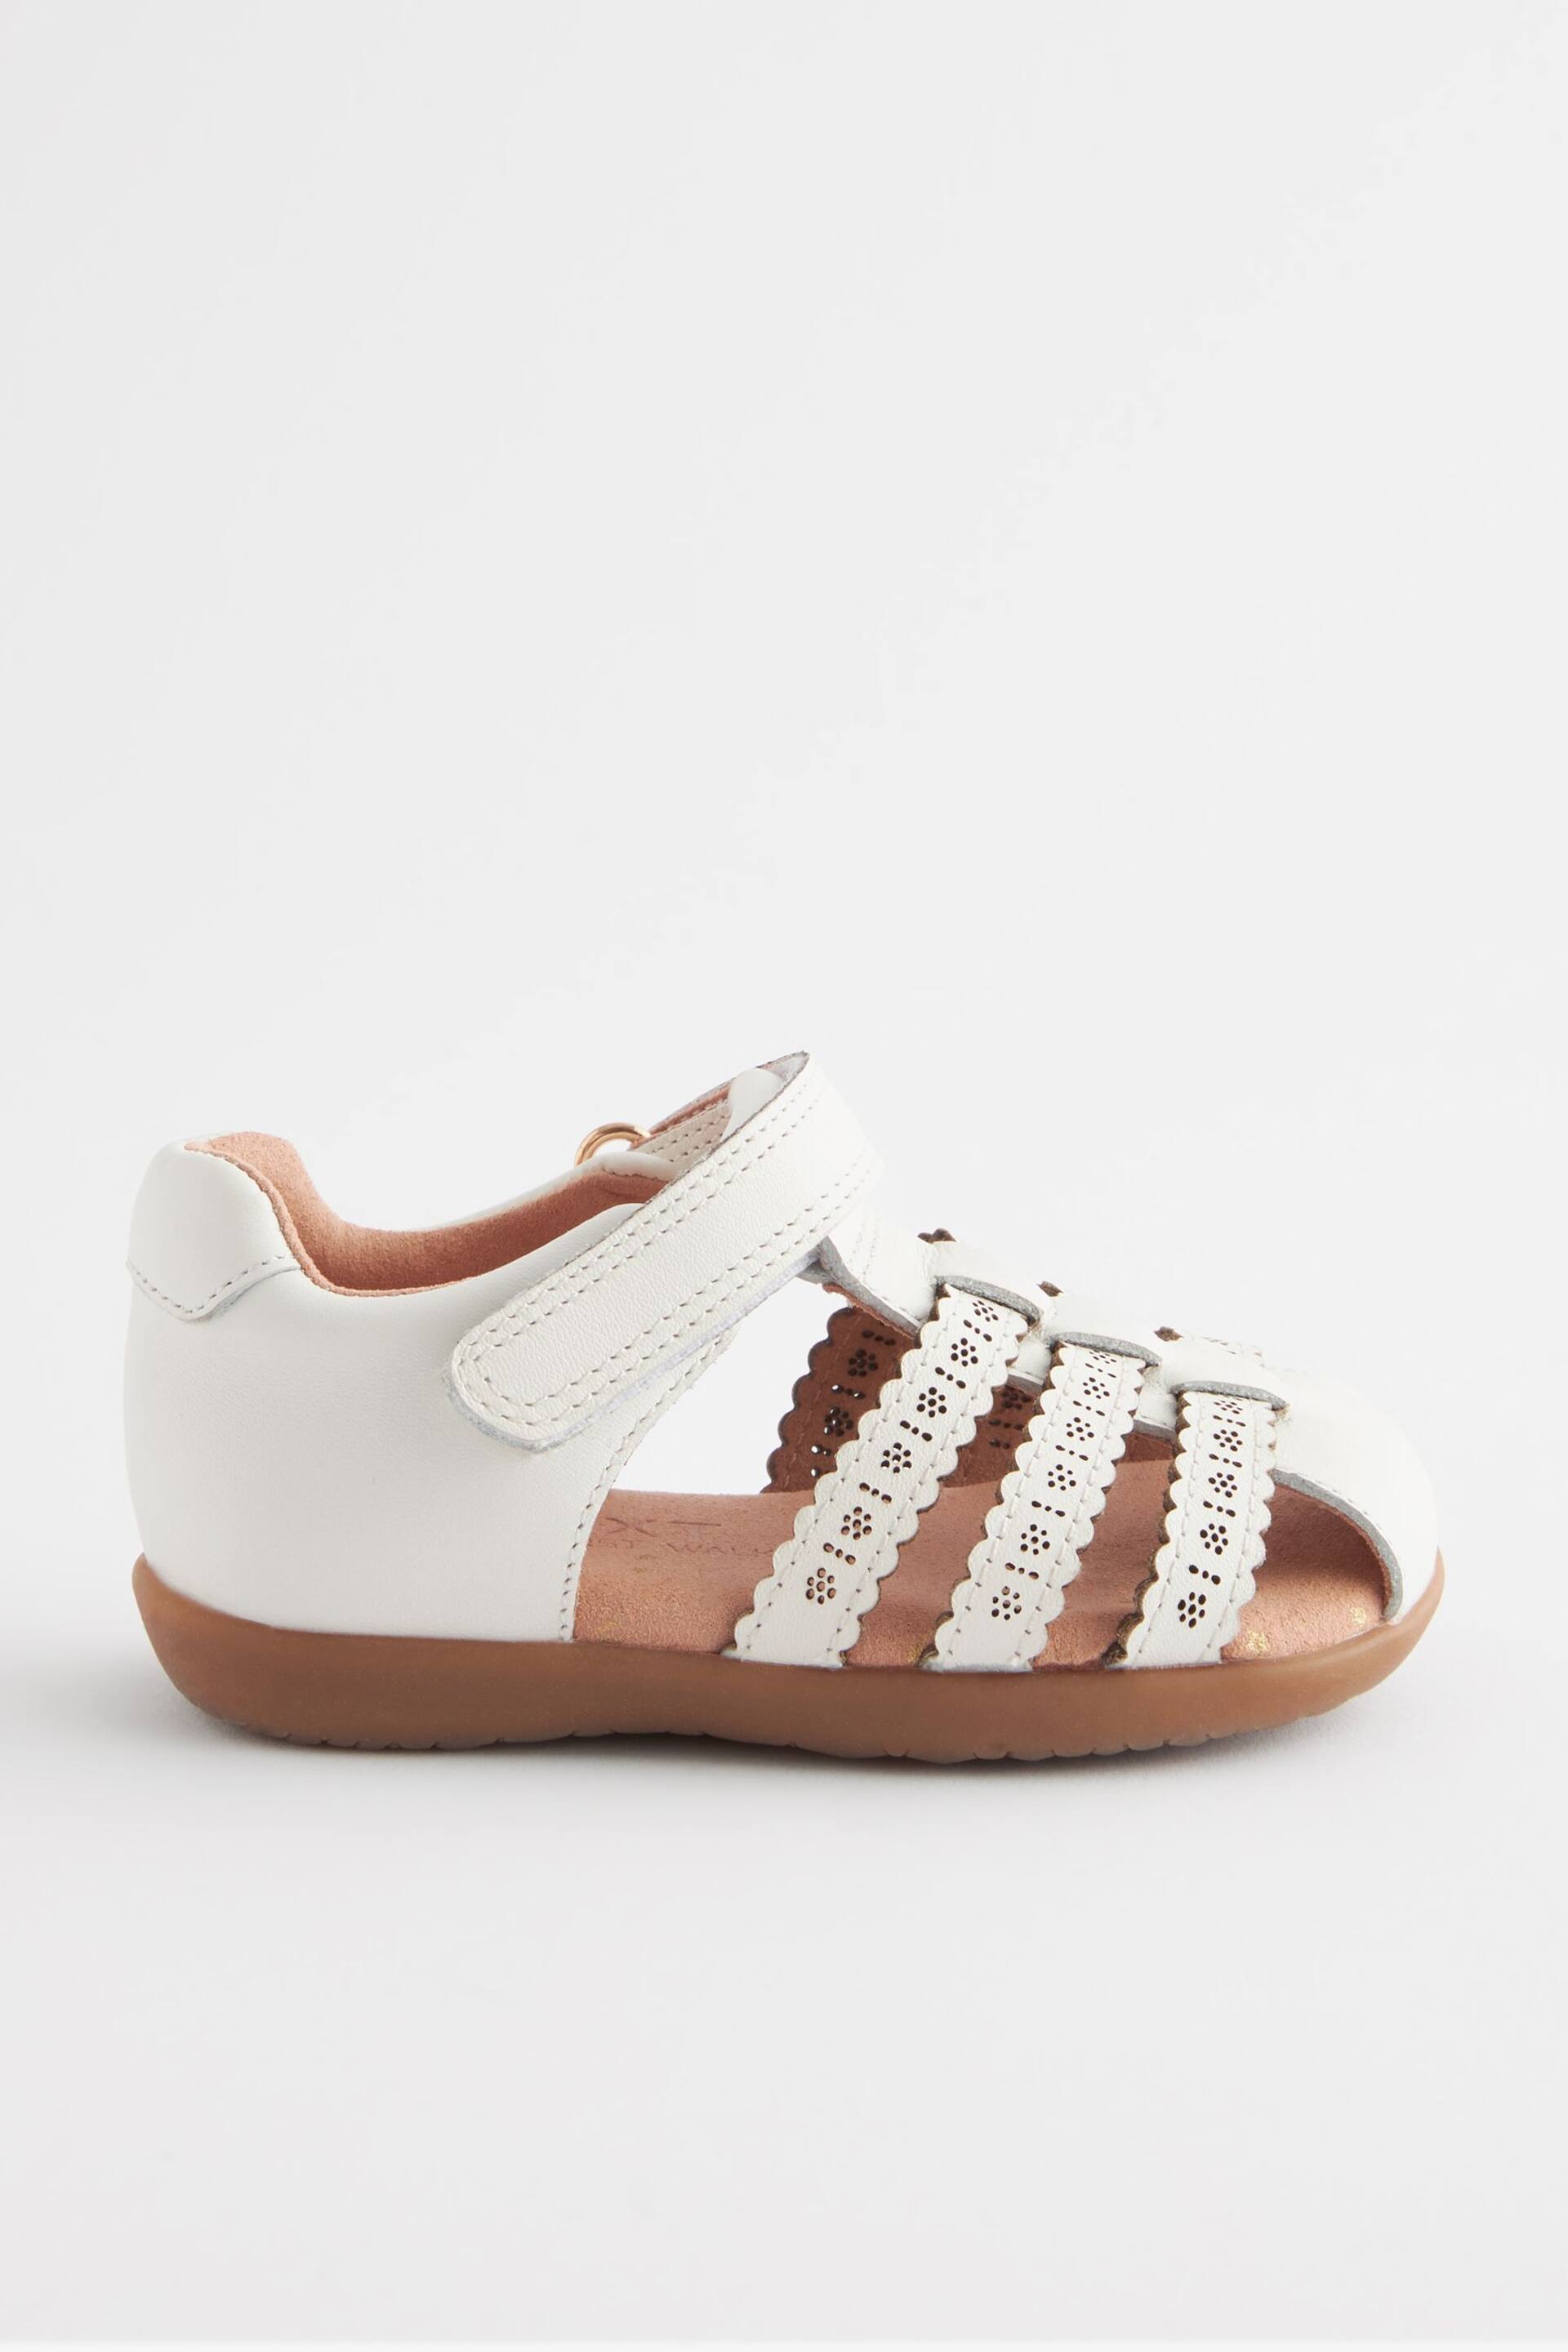 White Wide Fit (G) First Walker Fisherman Sandals - Image 2 of 5